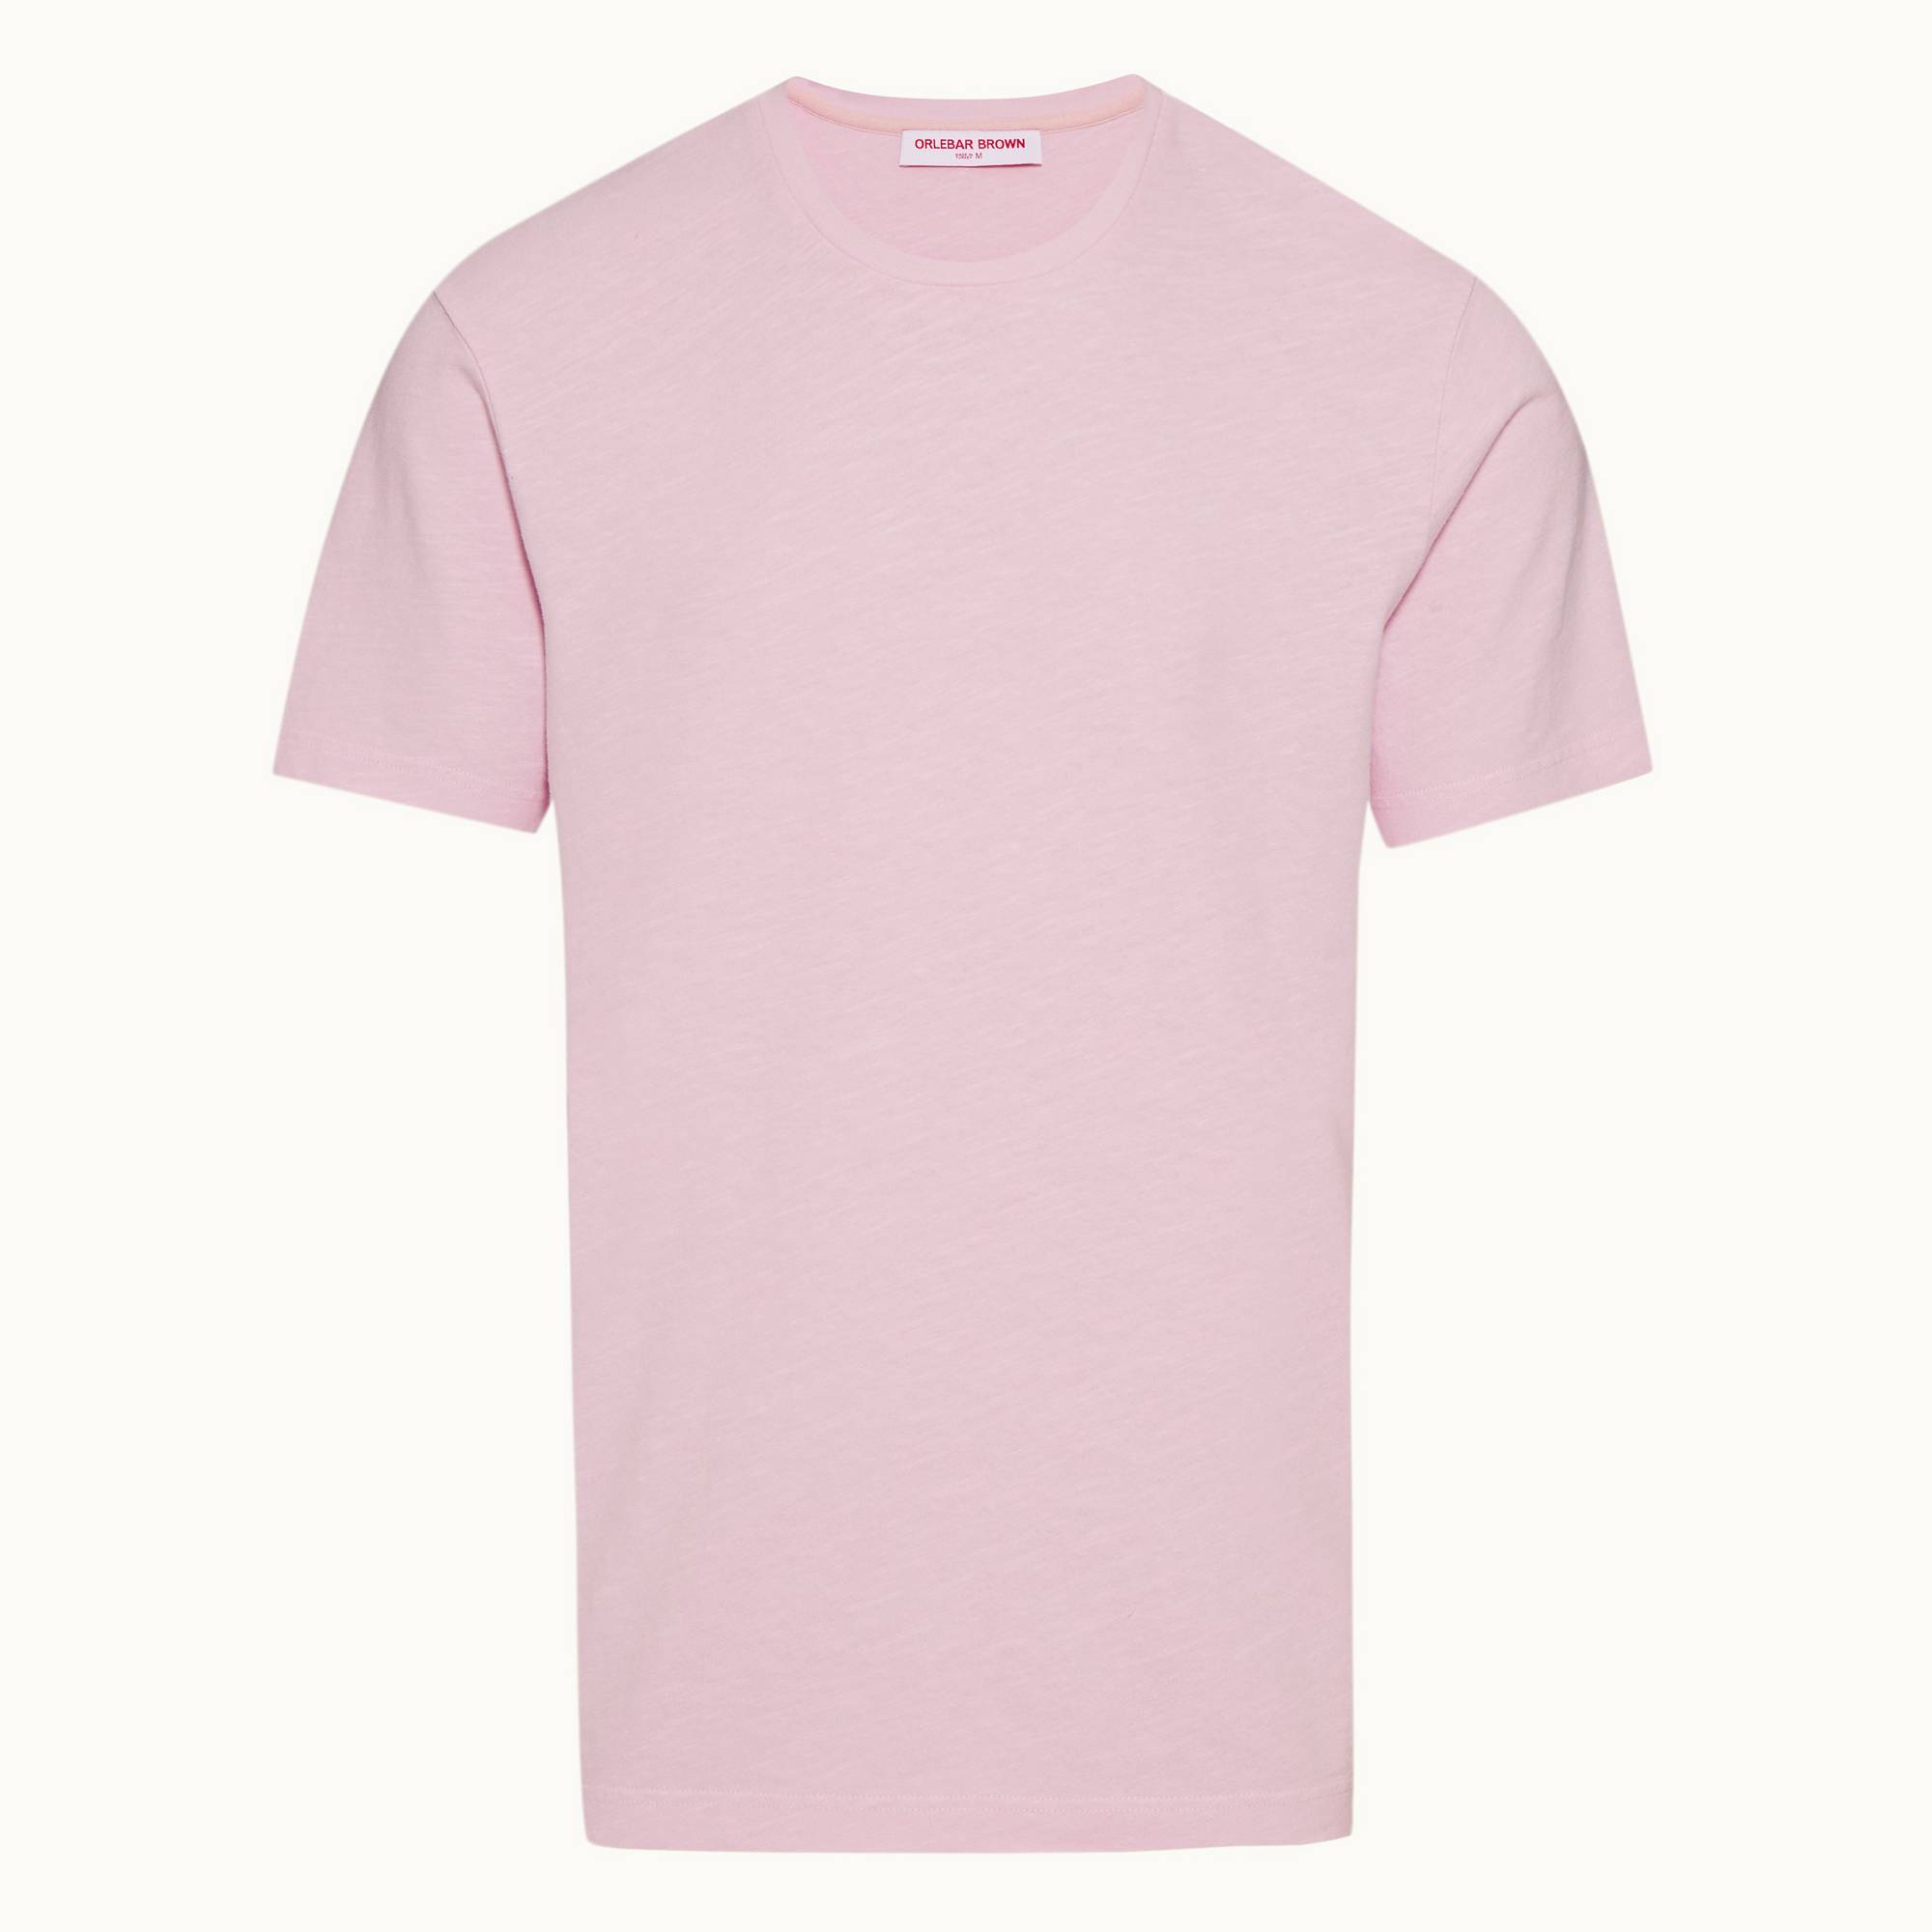 Nicolas - Mens Conch Pink Relaxed Fit Garment Dye T-shirt